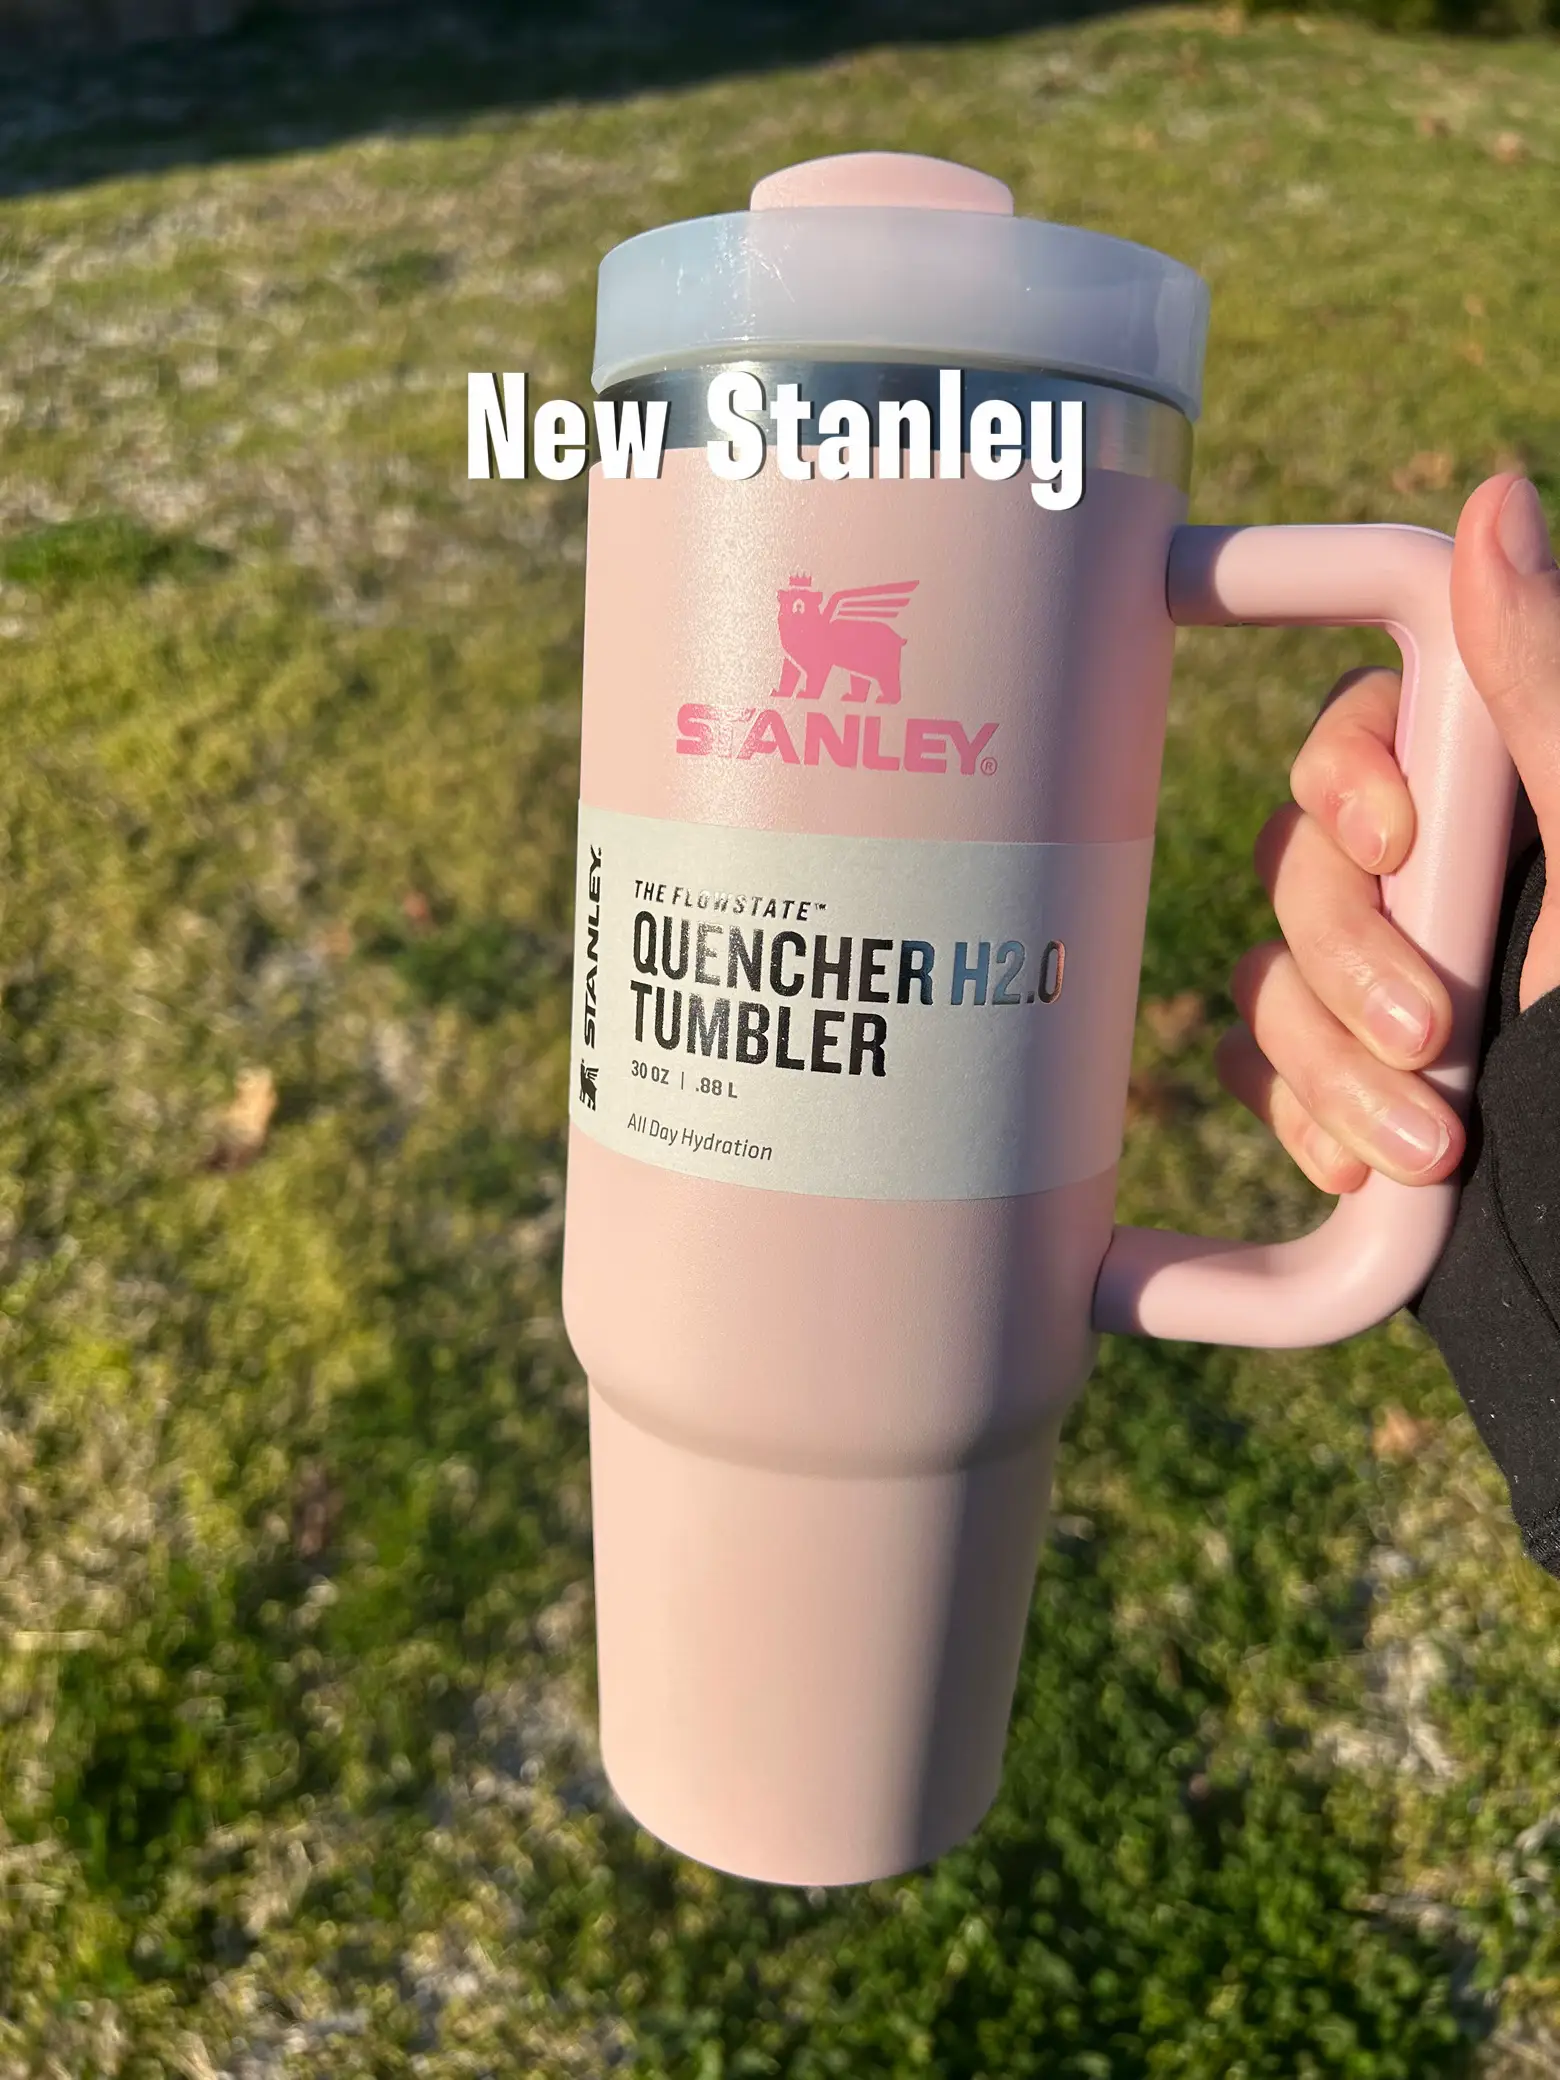 🌸 Stanley SIZZLING PINK 30 oz Quencher H2.0 Tumbler Target Exclusive Cup 🌸